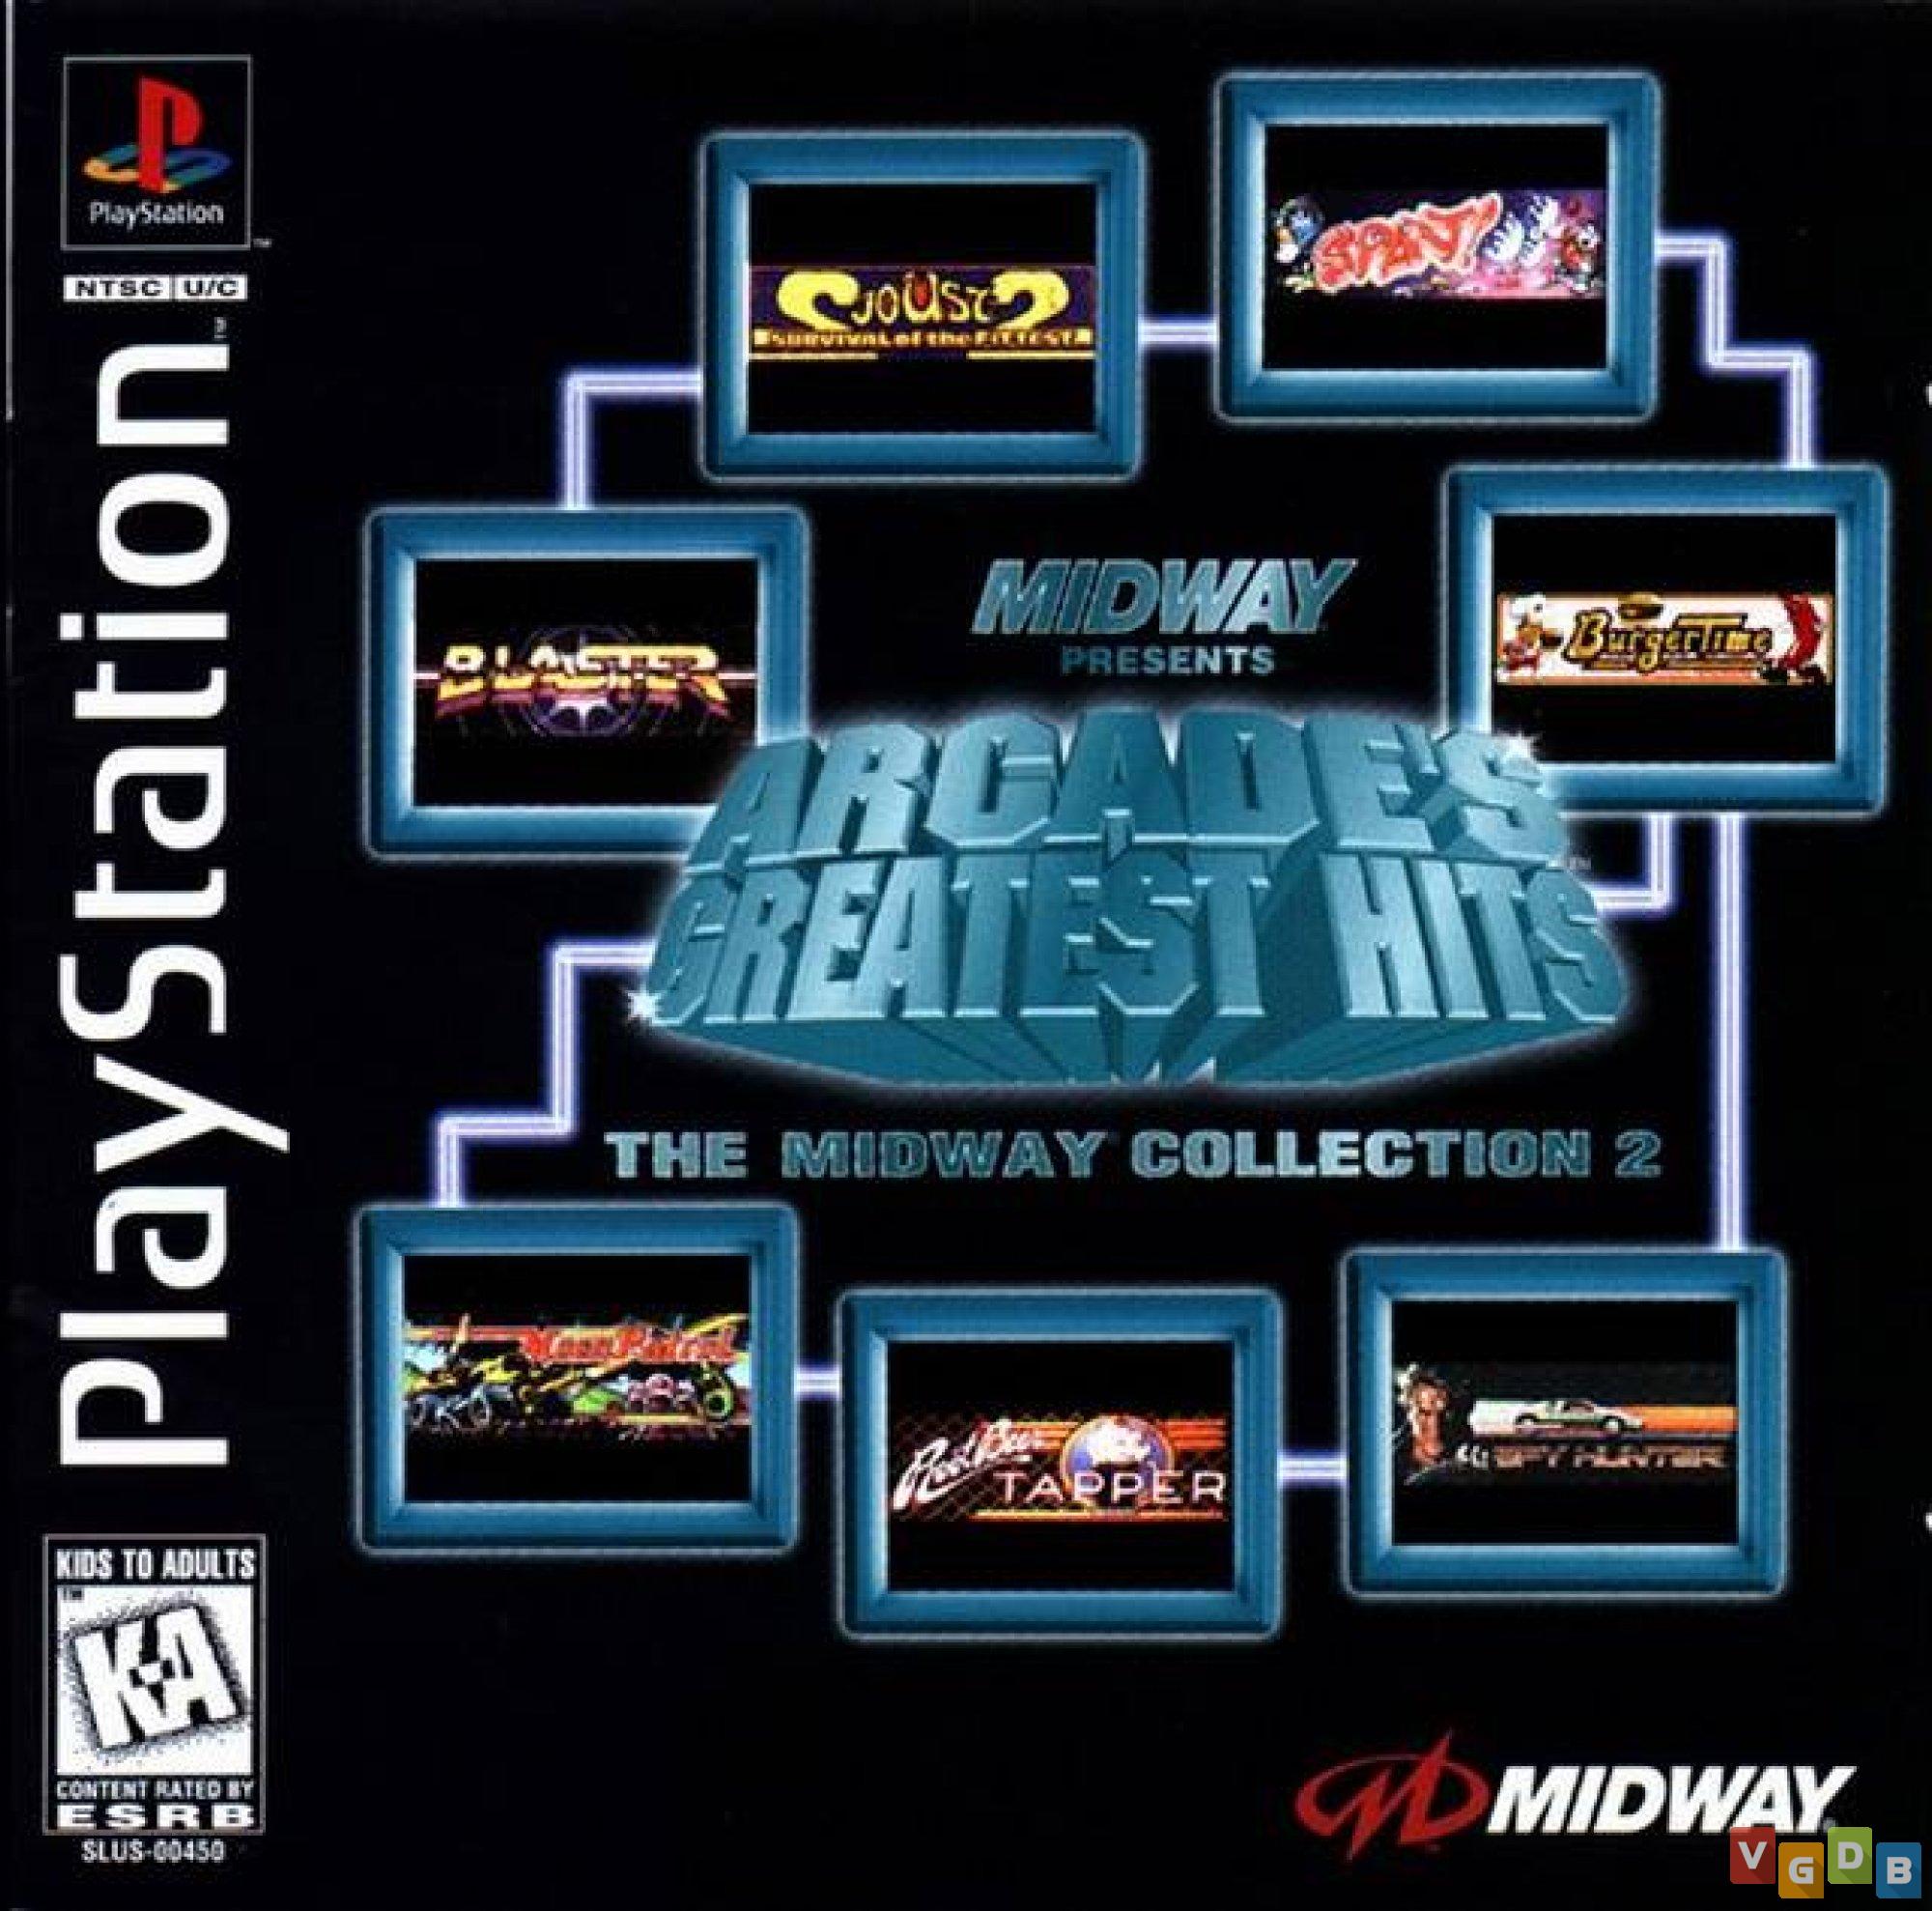 Arcade's Greatest Hits - the Midway collection 2. 2 Midway Arcade. PLAYSTATION Greatest Hits игры. Midway студия игр. Best collection 2